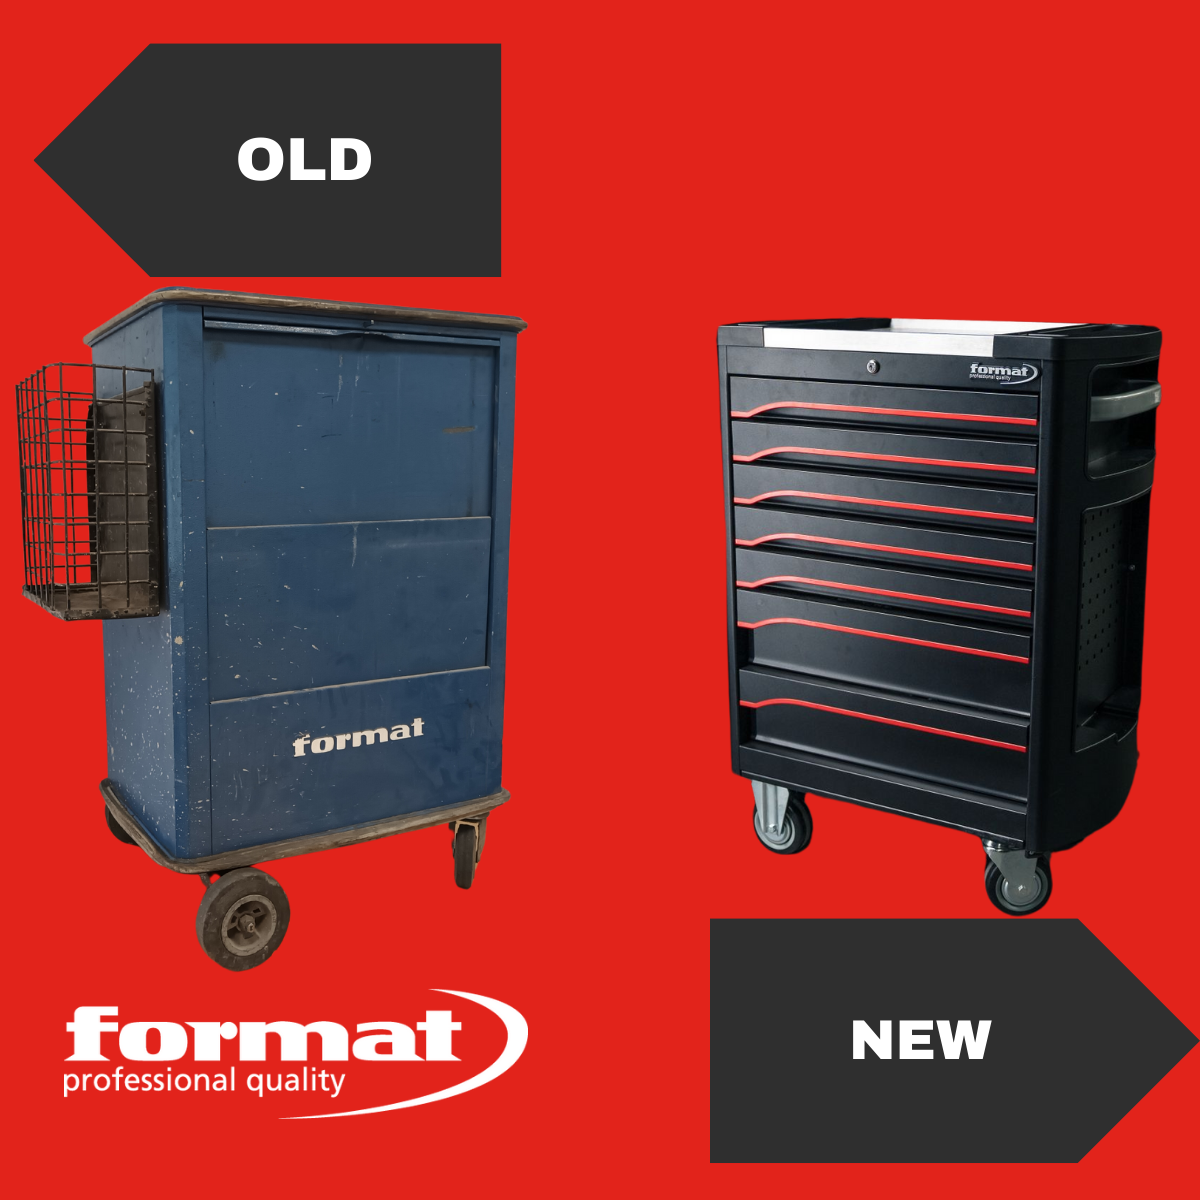 The FORMAT rolling workbench – ‘Changed design with unchanged quality’